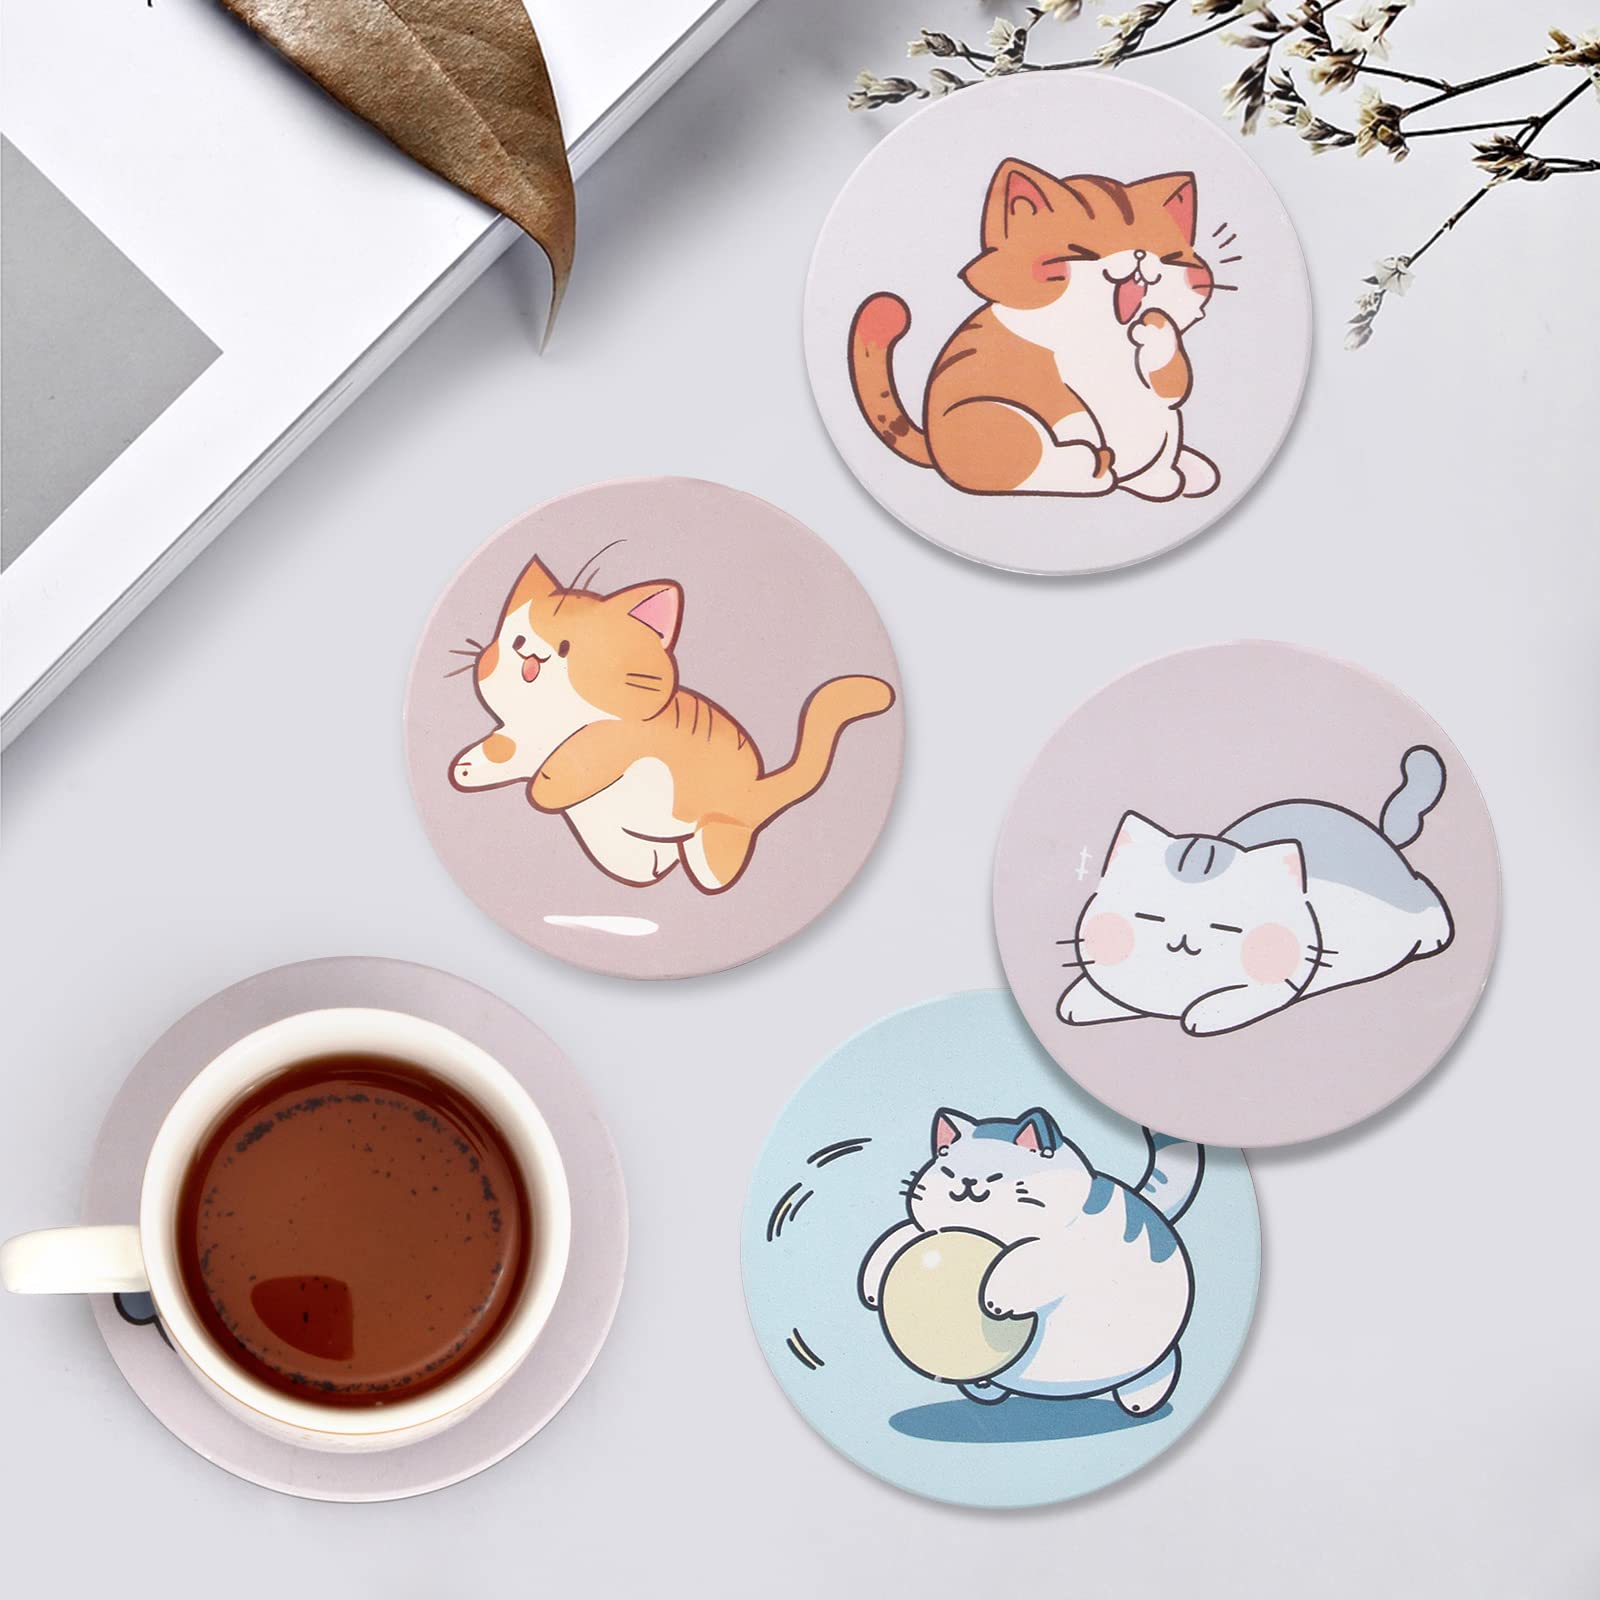 6 Pcs Cute Coasters Funny Cat Coasters with Holder Absorbent Ceramic Coasters for Table Drink Coaster Gift Round Multicolor Beverage Beer Coasters Best Fun Bar Coasters